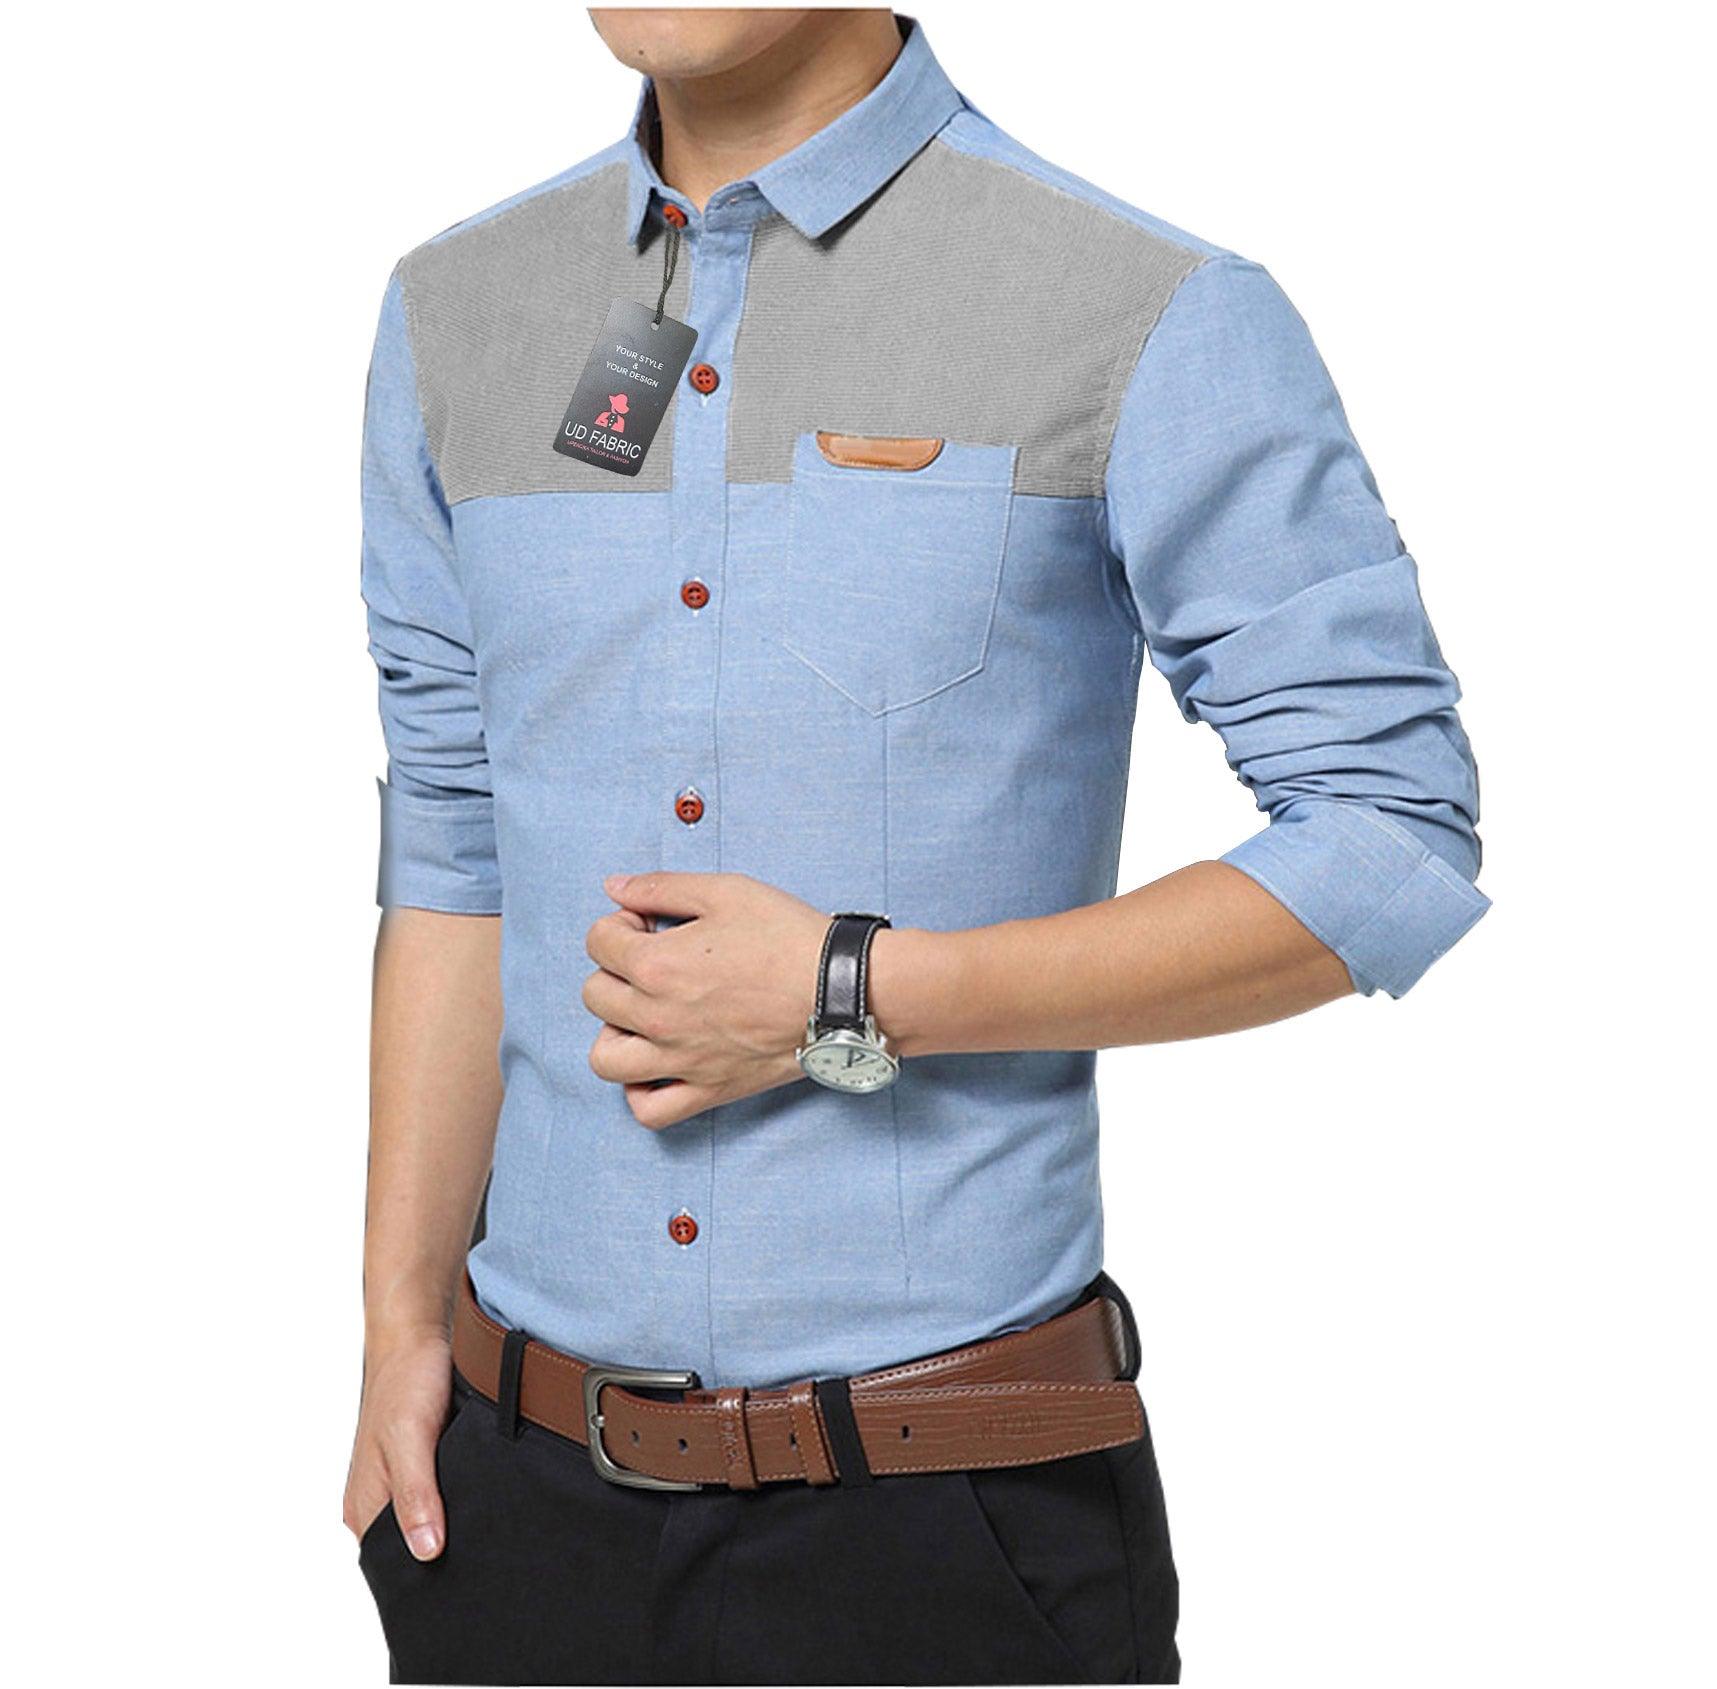 UD FABRIC Casual Slim Cotton Shirt for Men - Skyblue - UD FABRIC - Your Style our Design